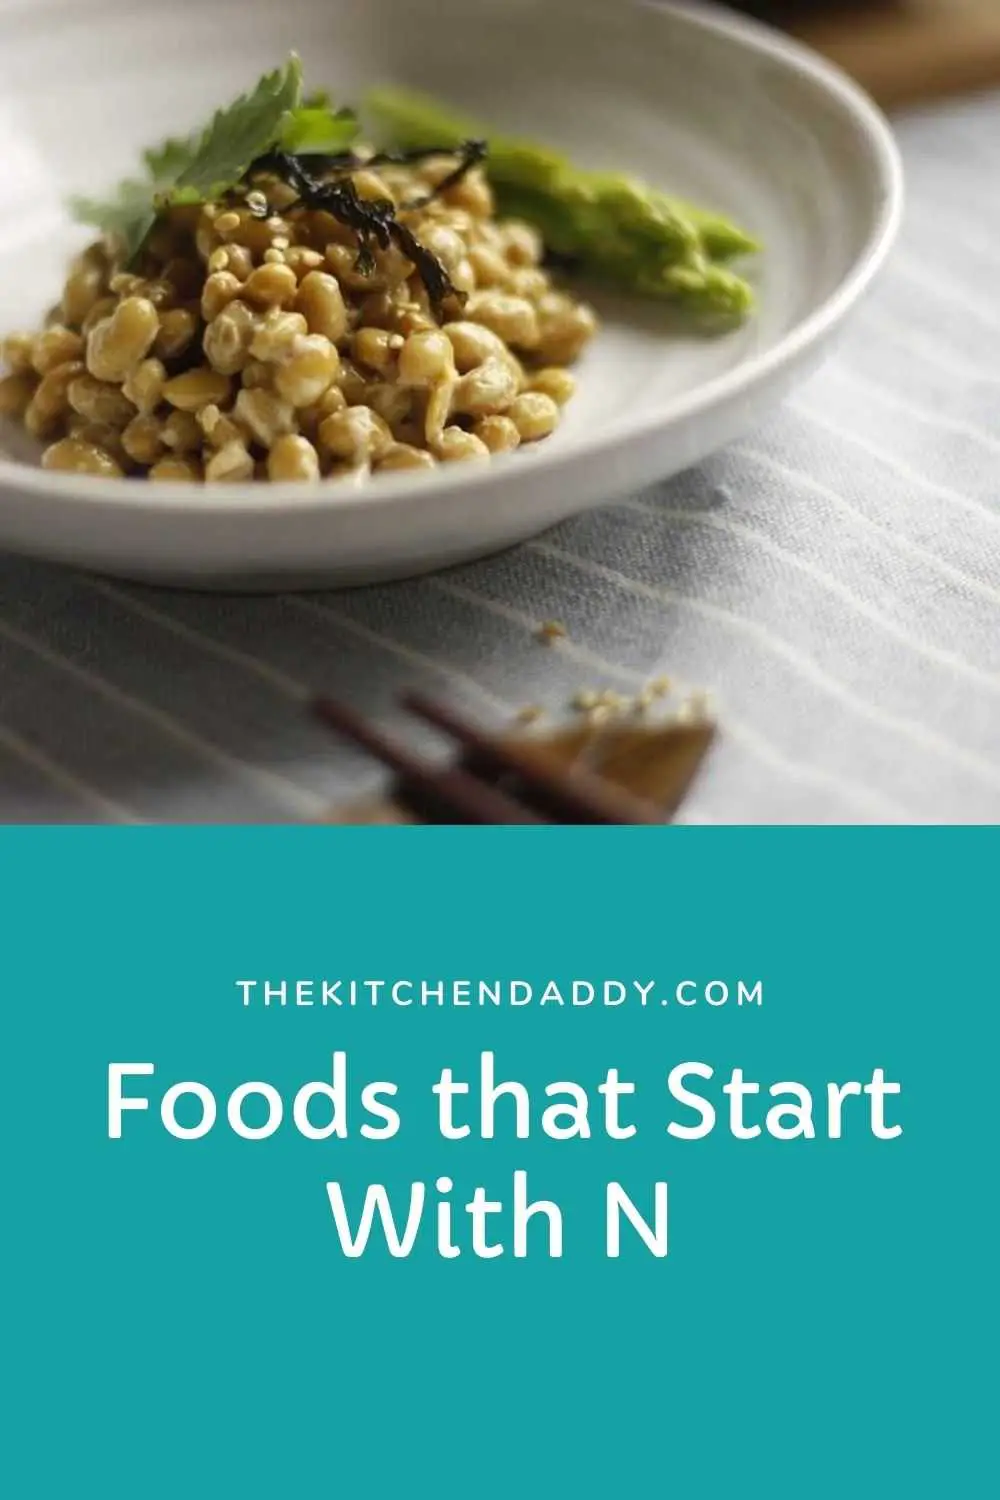 Foods that Start with N